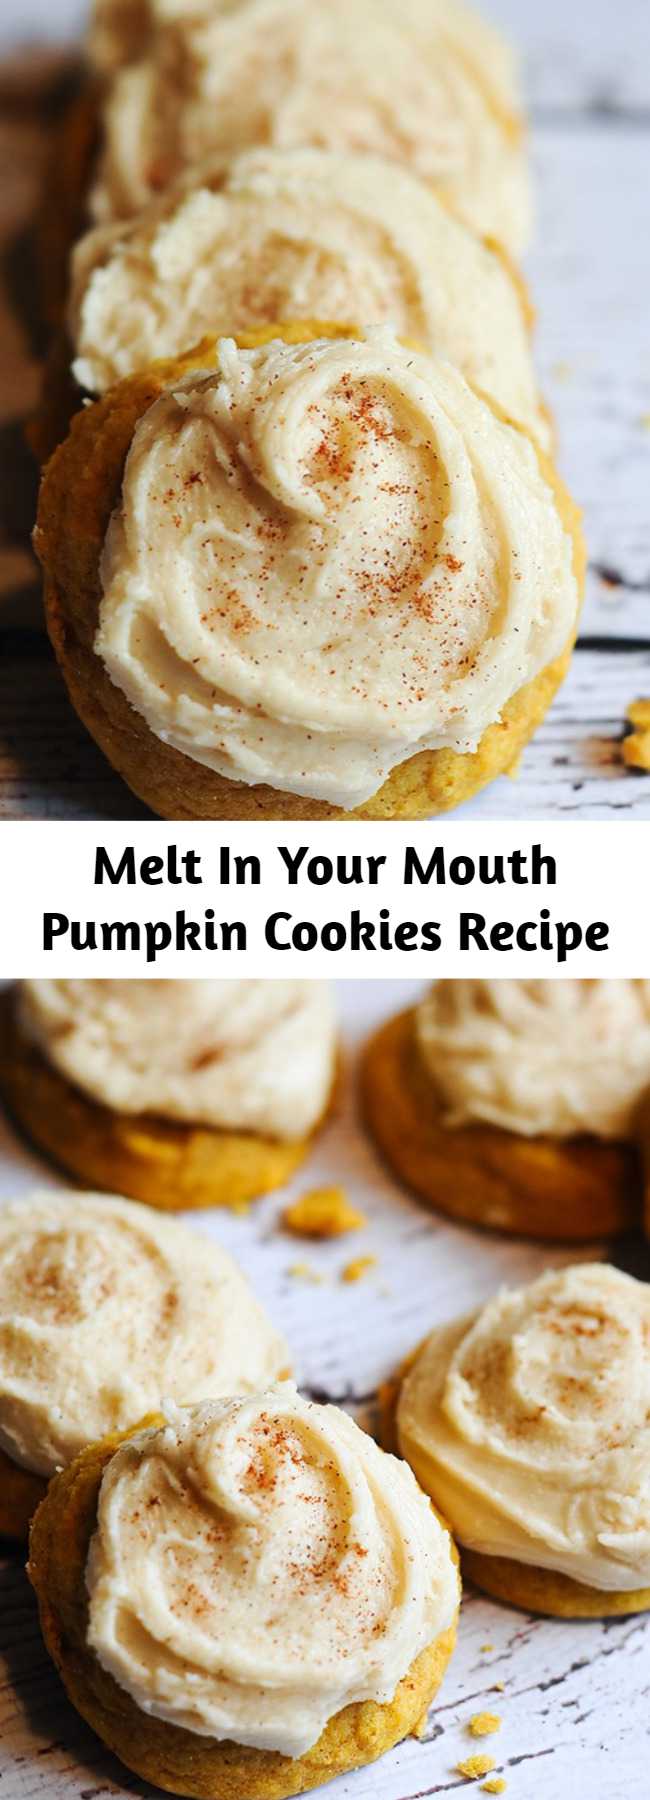 Melt In Your Mouth Pumpkin Cookies Recipe - I just made these cookies and they are AMAZING. Perfect pumpkin recipe and perfect pumpkin cookies. Pin this dessert now and make it this fall! If you’re ready to get your pumpkin fix or you’re just pinning great fall pumpkin recipes, you definitely don’t want to miss this melt-in-your-mouth pumpkin cookies recipe!